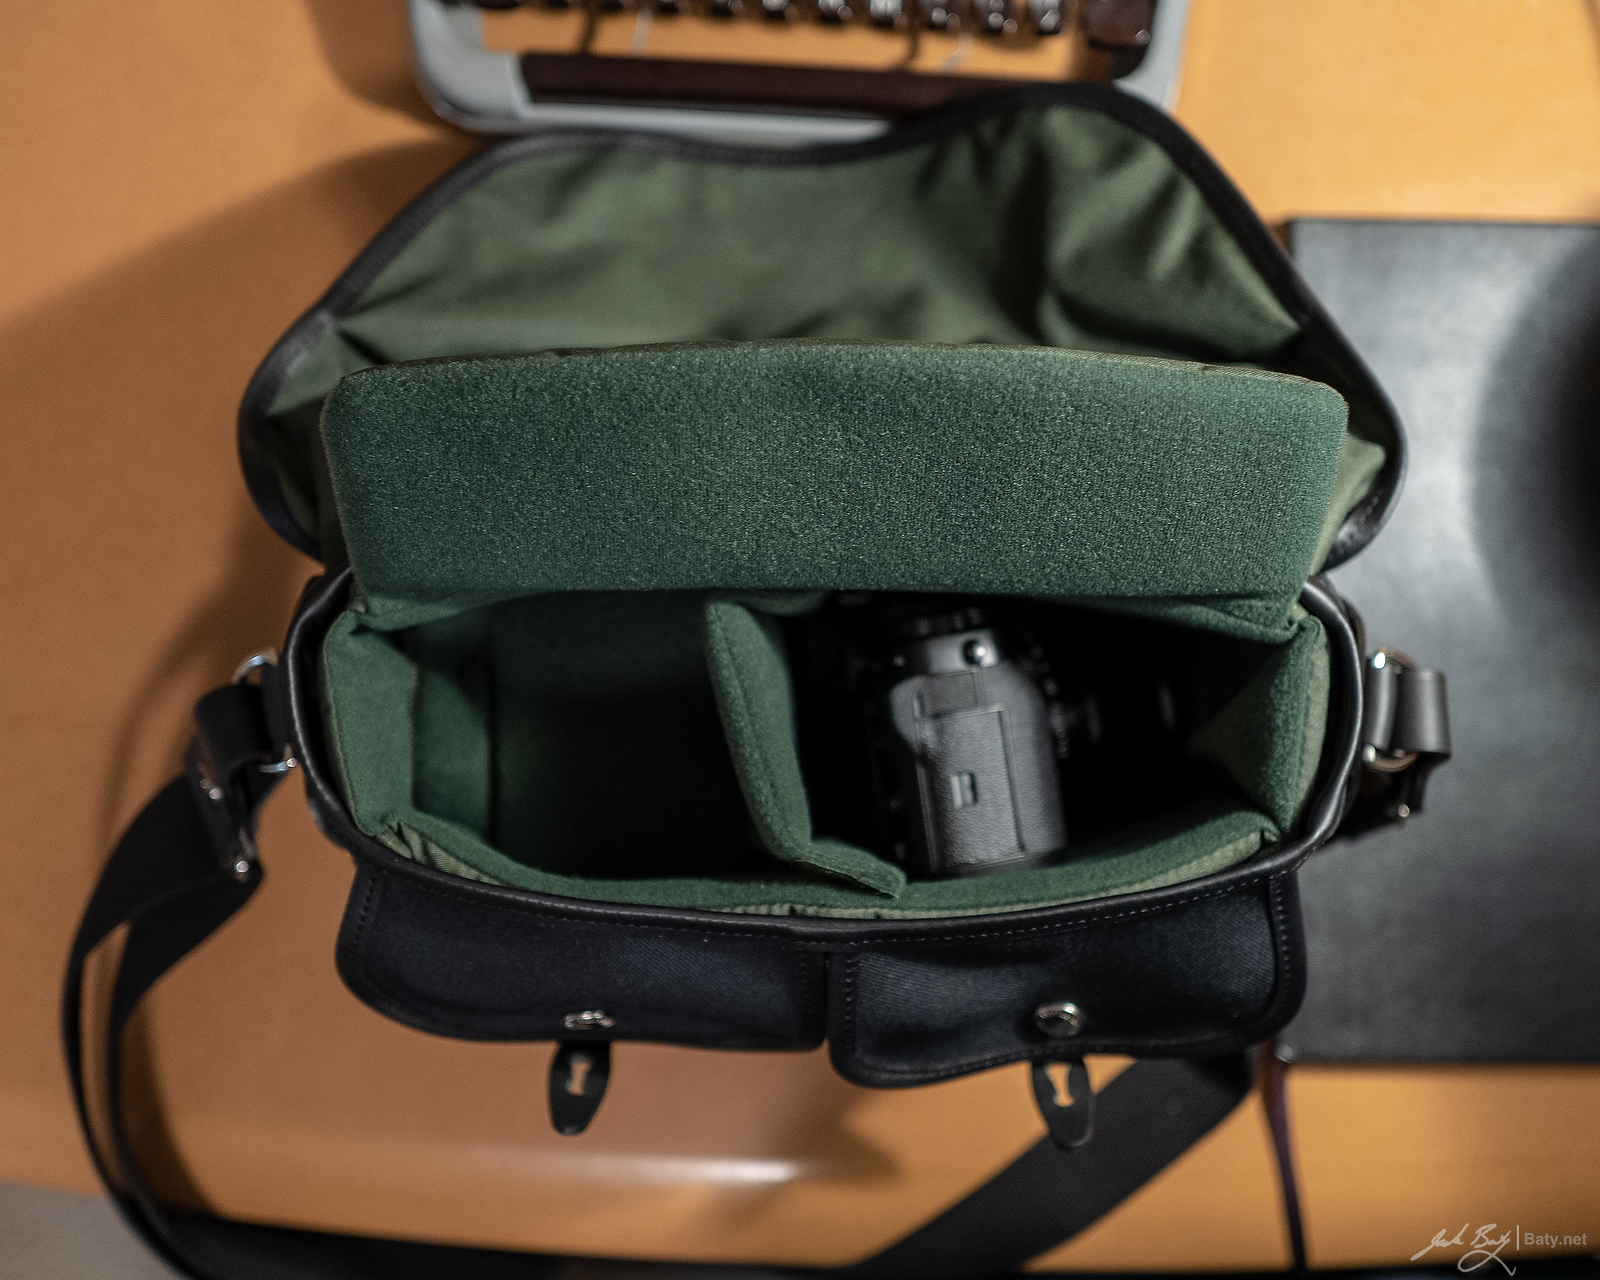 Hadley Pro with Fuji X-T3 and lenses